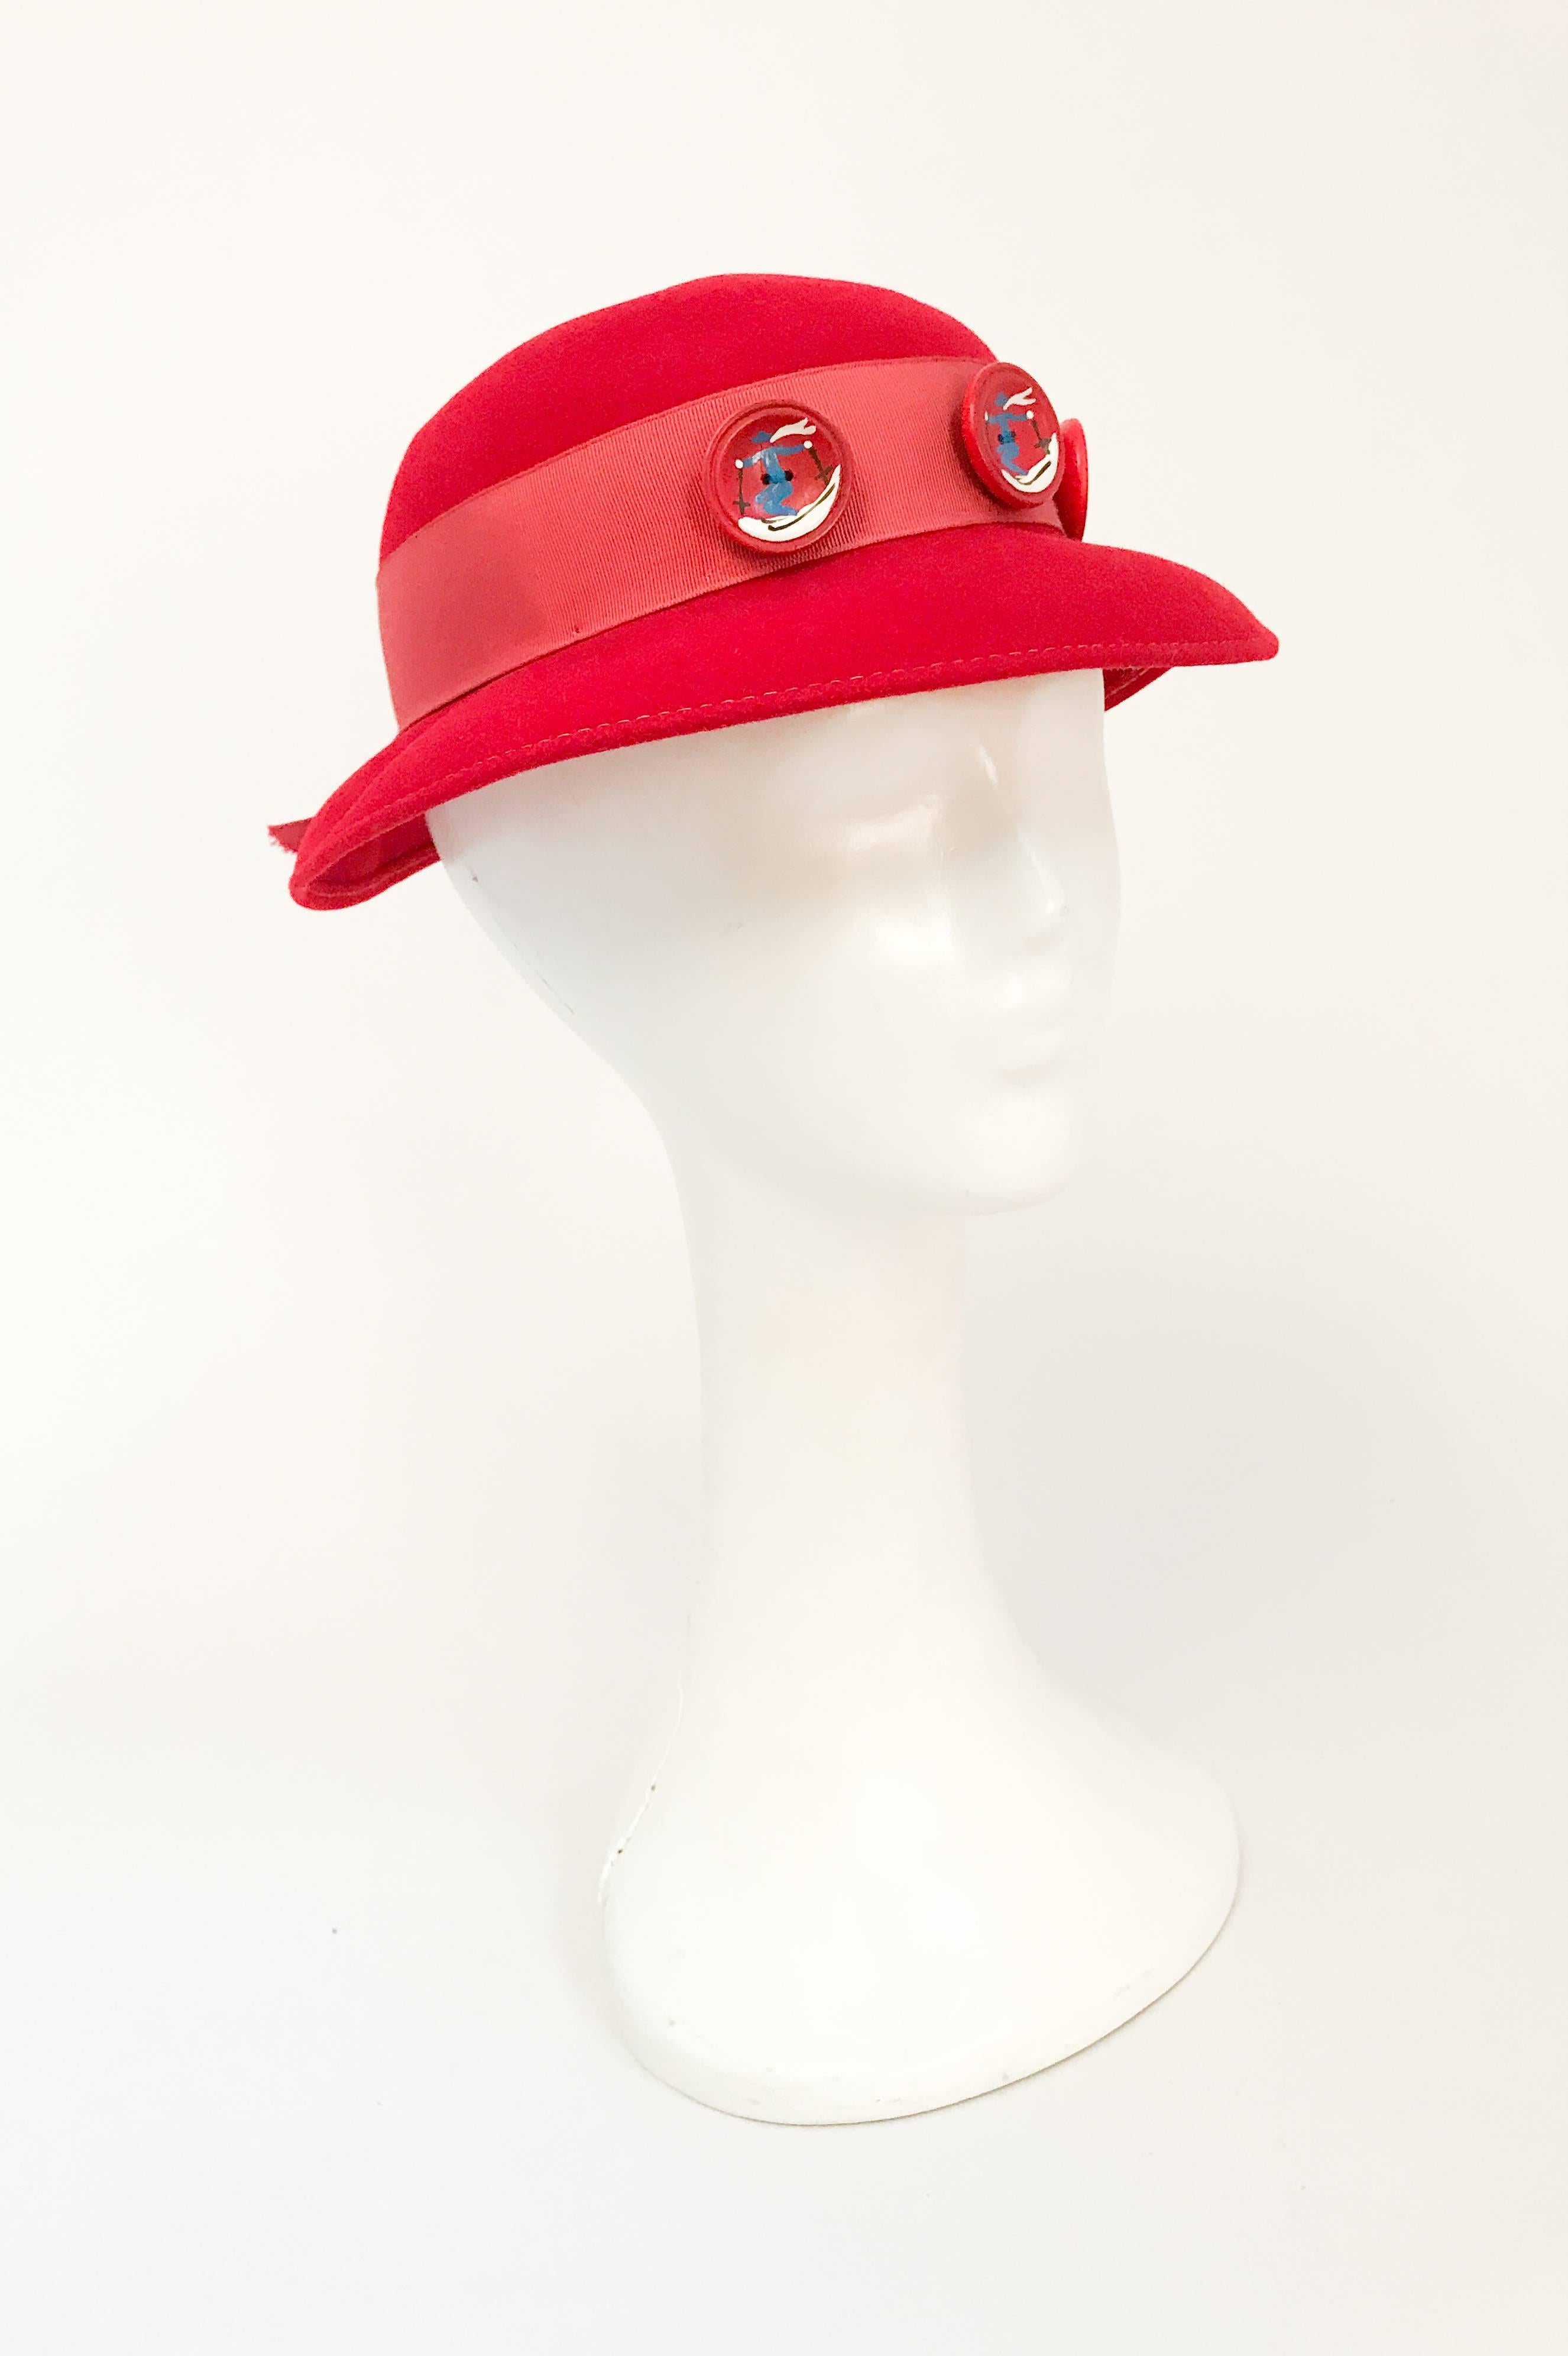 1930s Red Felt hat with Hand Painted Ski Buttons. Red felt hat with wide grosgrain band, back opening and Hand painted ski motif buttons. 